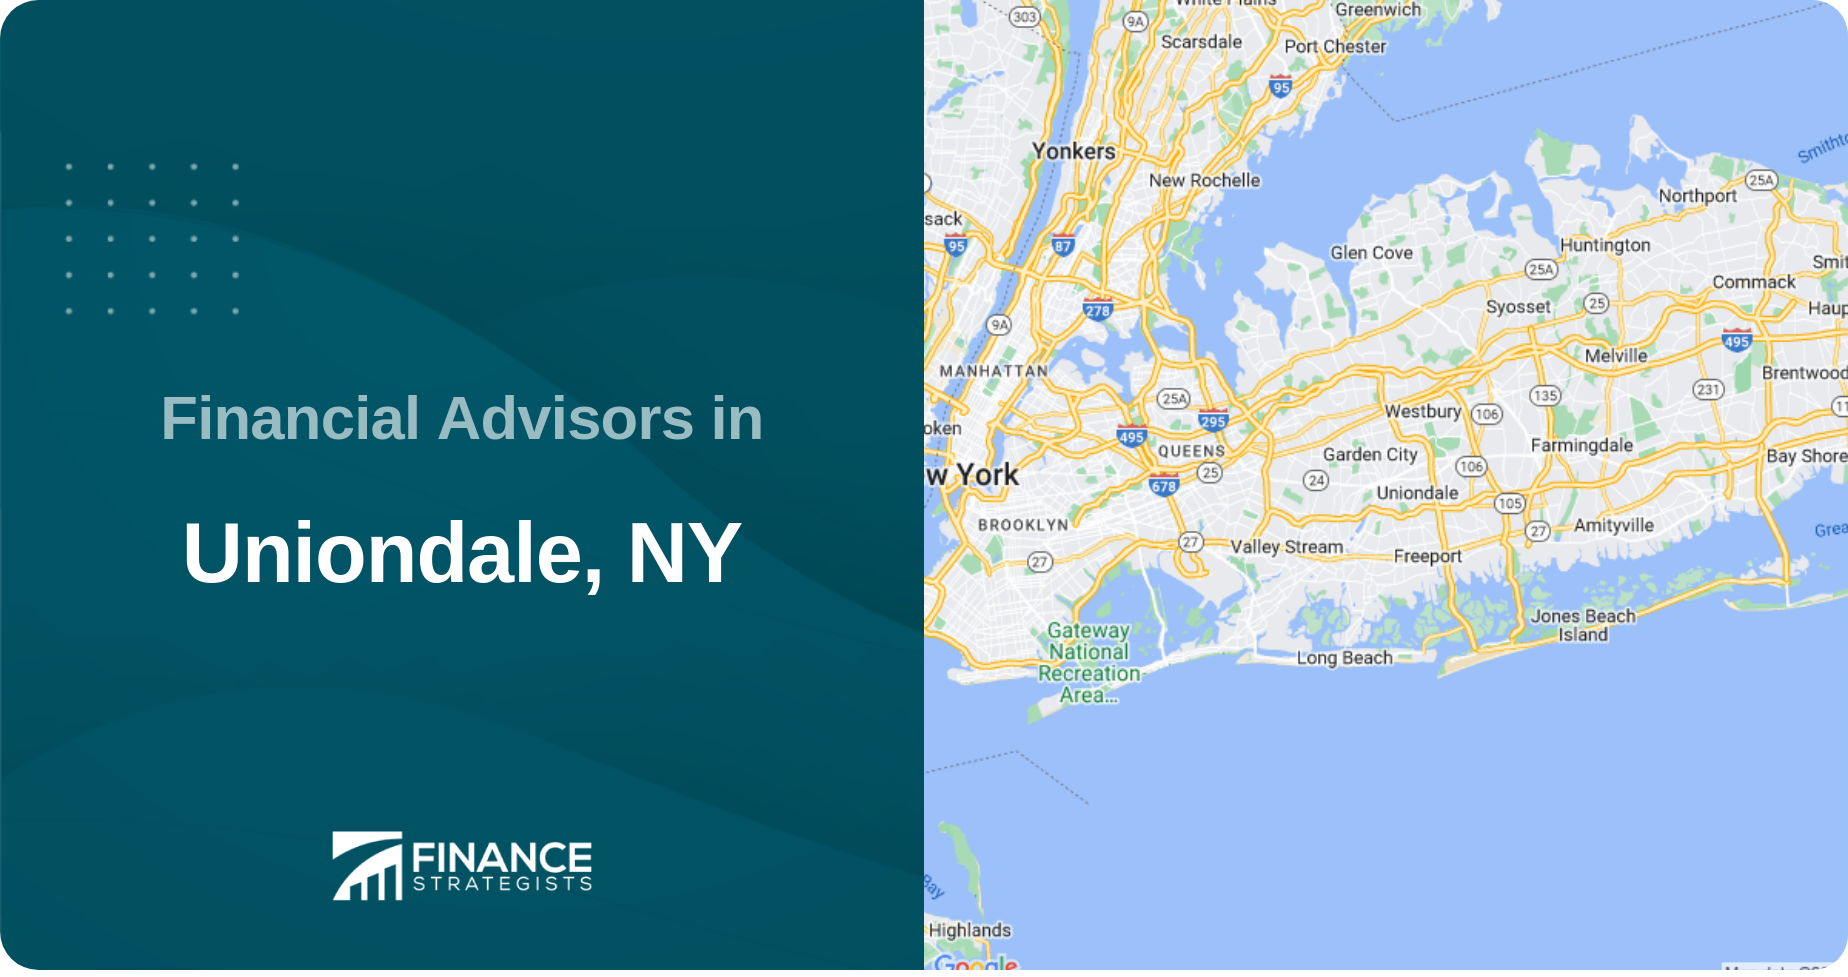 Financial Advisors in Uniondale, NY